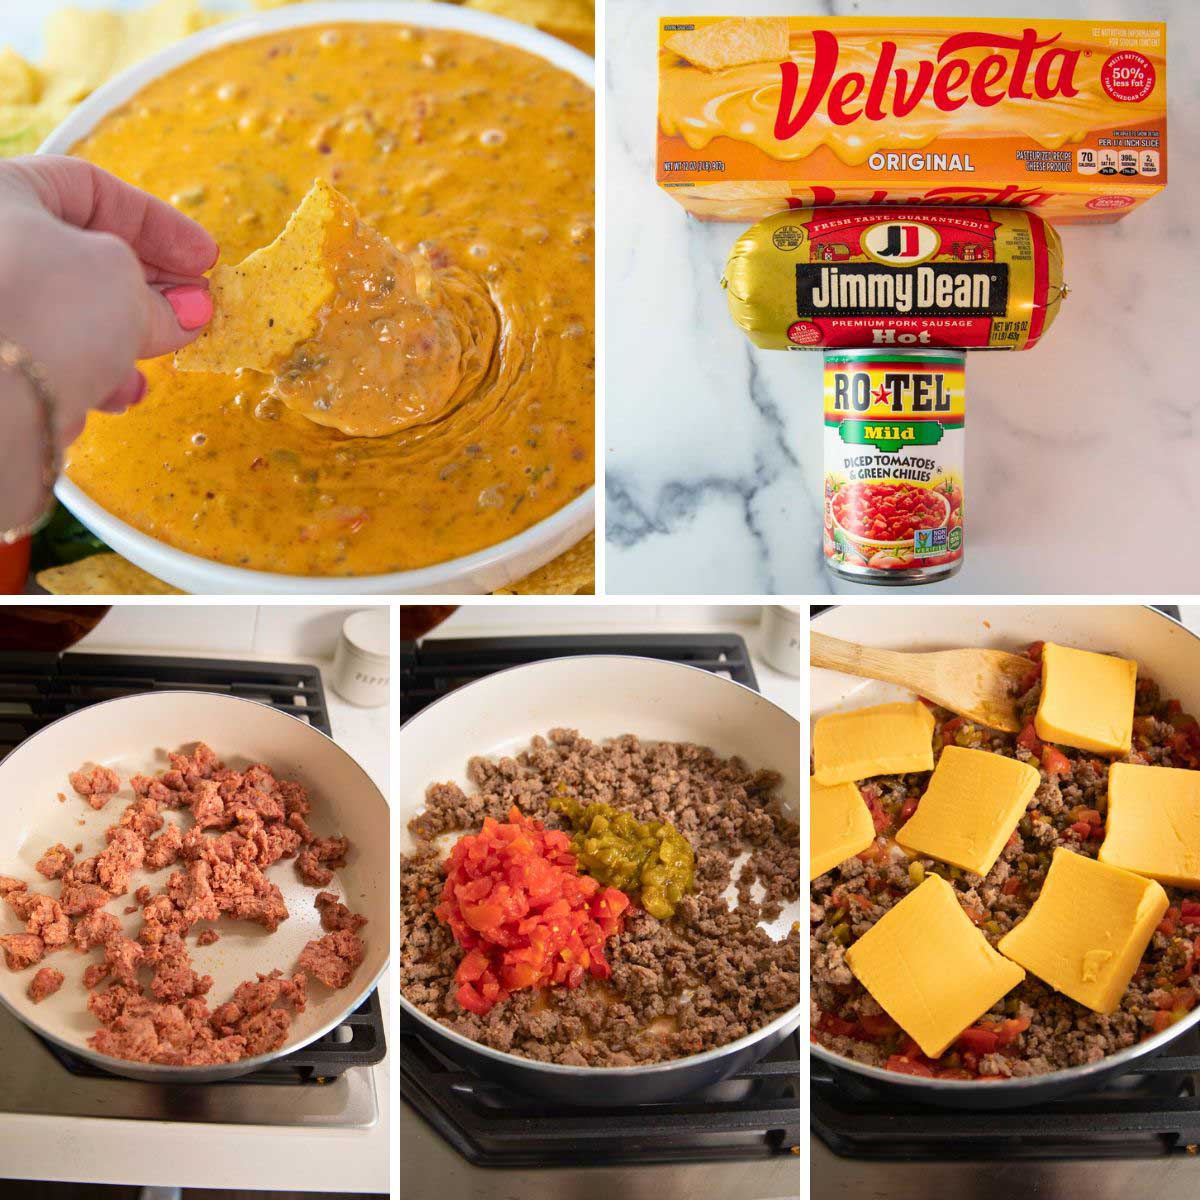 steps of how to make rotel dip with sausage. picture of rotel dip ingredients, ground beef cooking in a skillet, cheese on top of cooked ground beef in a skillet